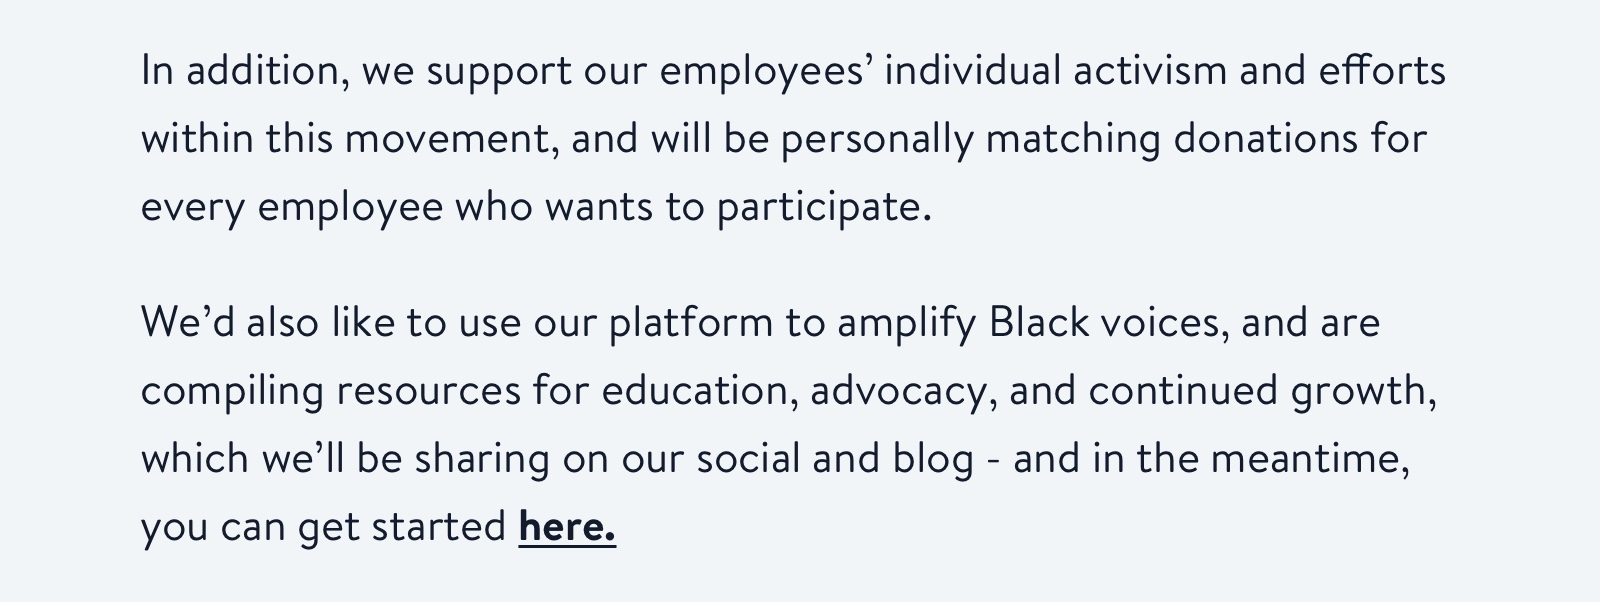 In addition, we support our employees' individual activism and efforts within this movement, and will be personally matching donations for every employee who wants to participate.
                          
We'd also like to use our platform to amplify Black voices, and are compiling resources for education, advocacy, and continued growth, which we'll be sharing on our social and blog - and in the meantime, you can get started here.